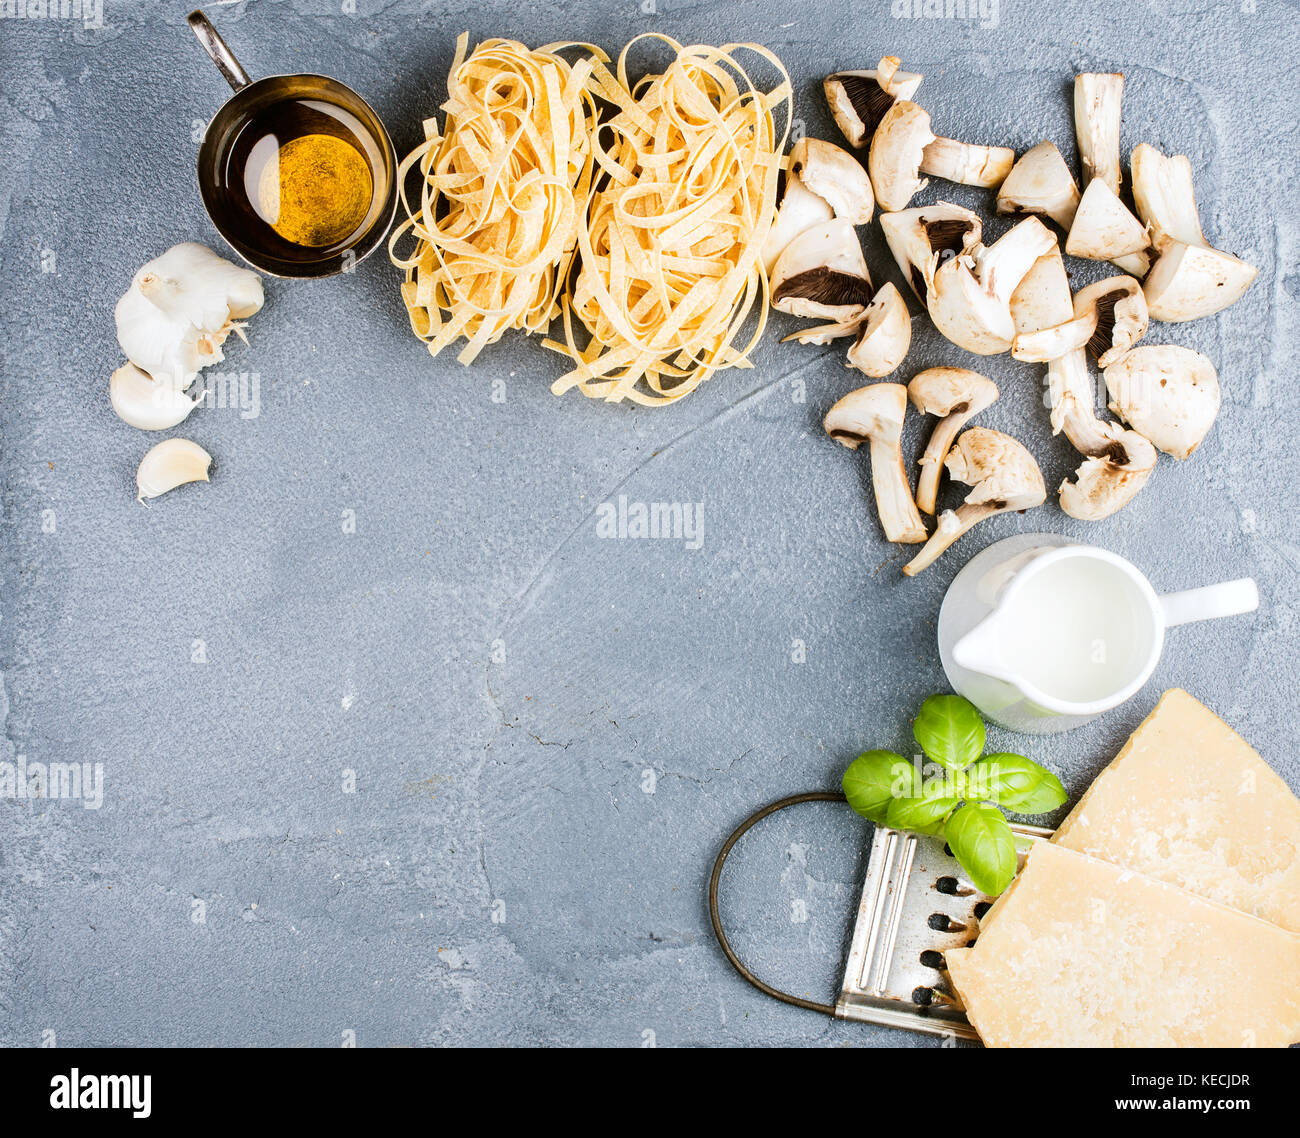 Ingredients for cooking pasta with mushrooms and white sauce Stock Photo